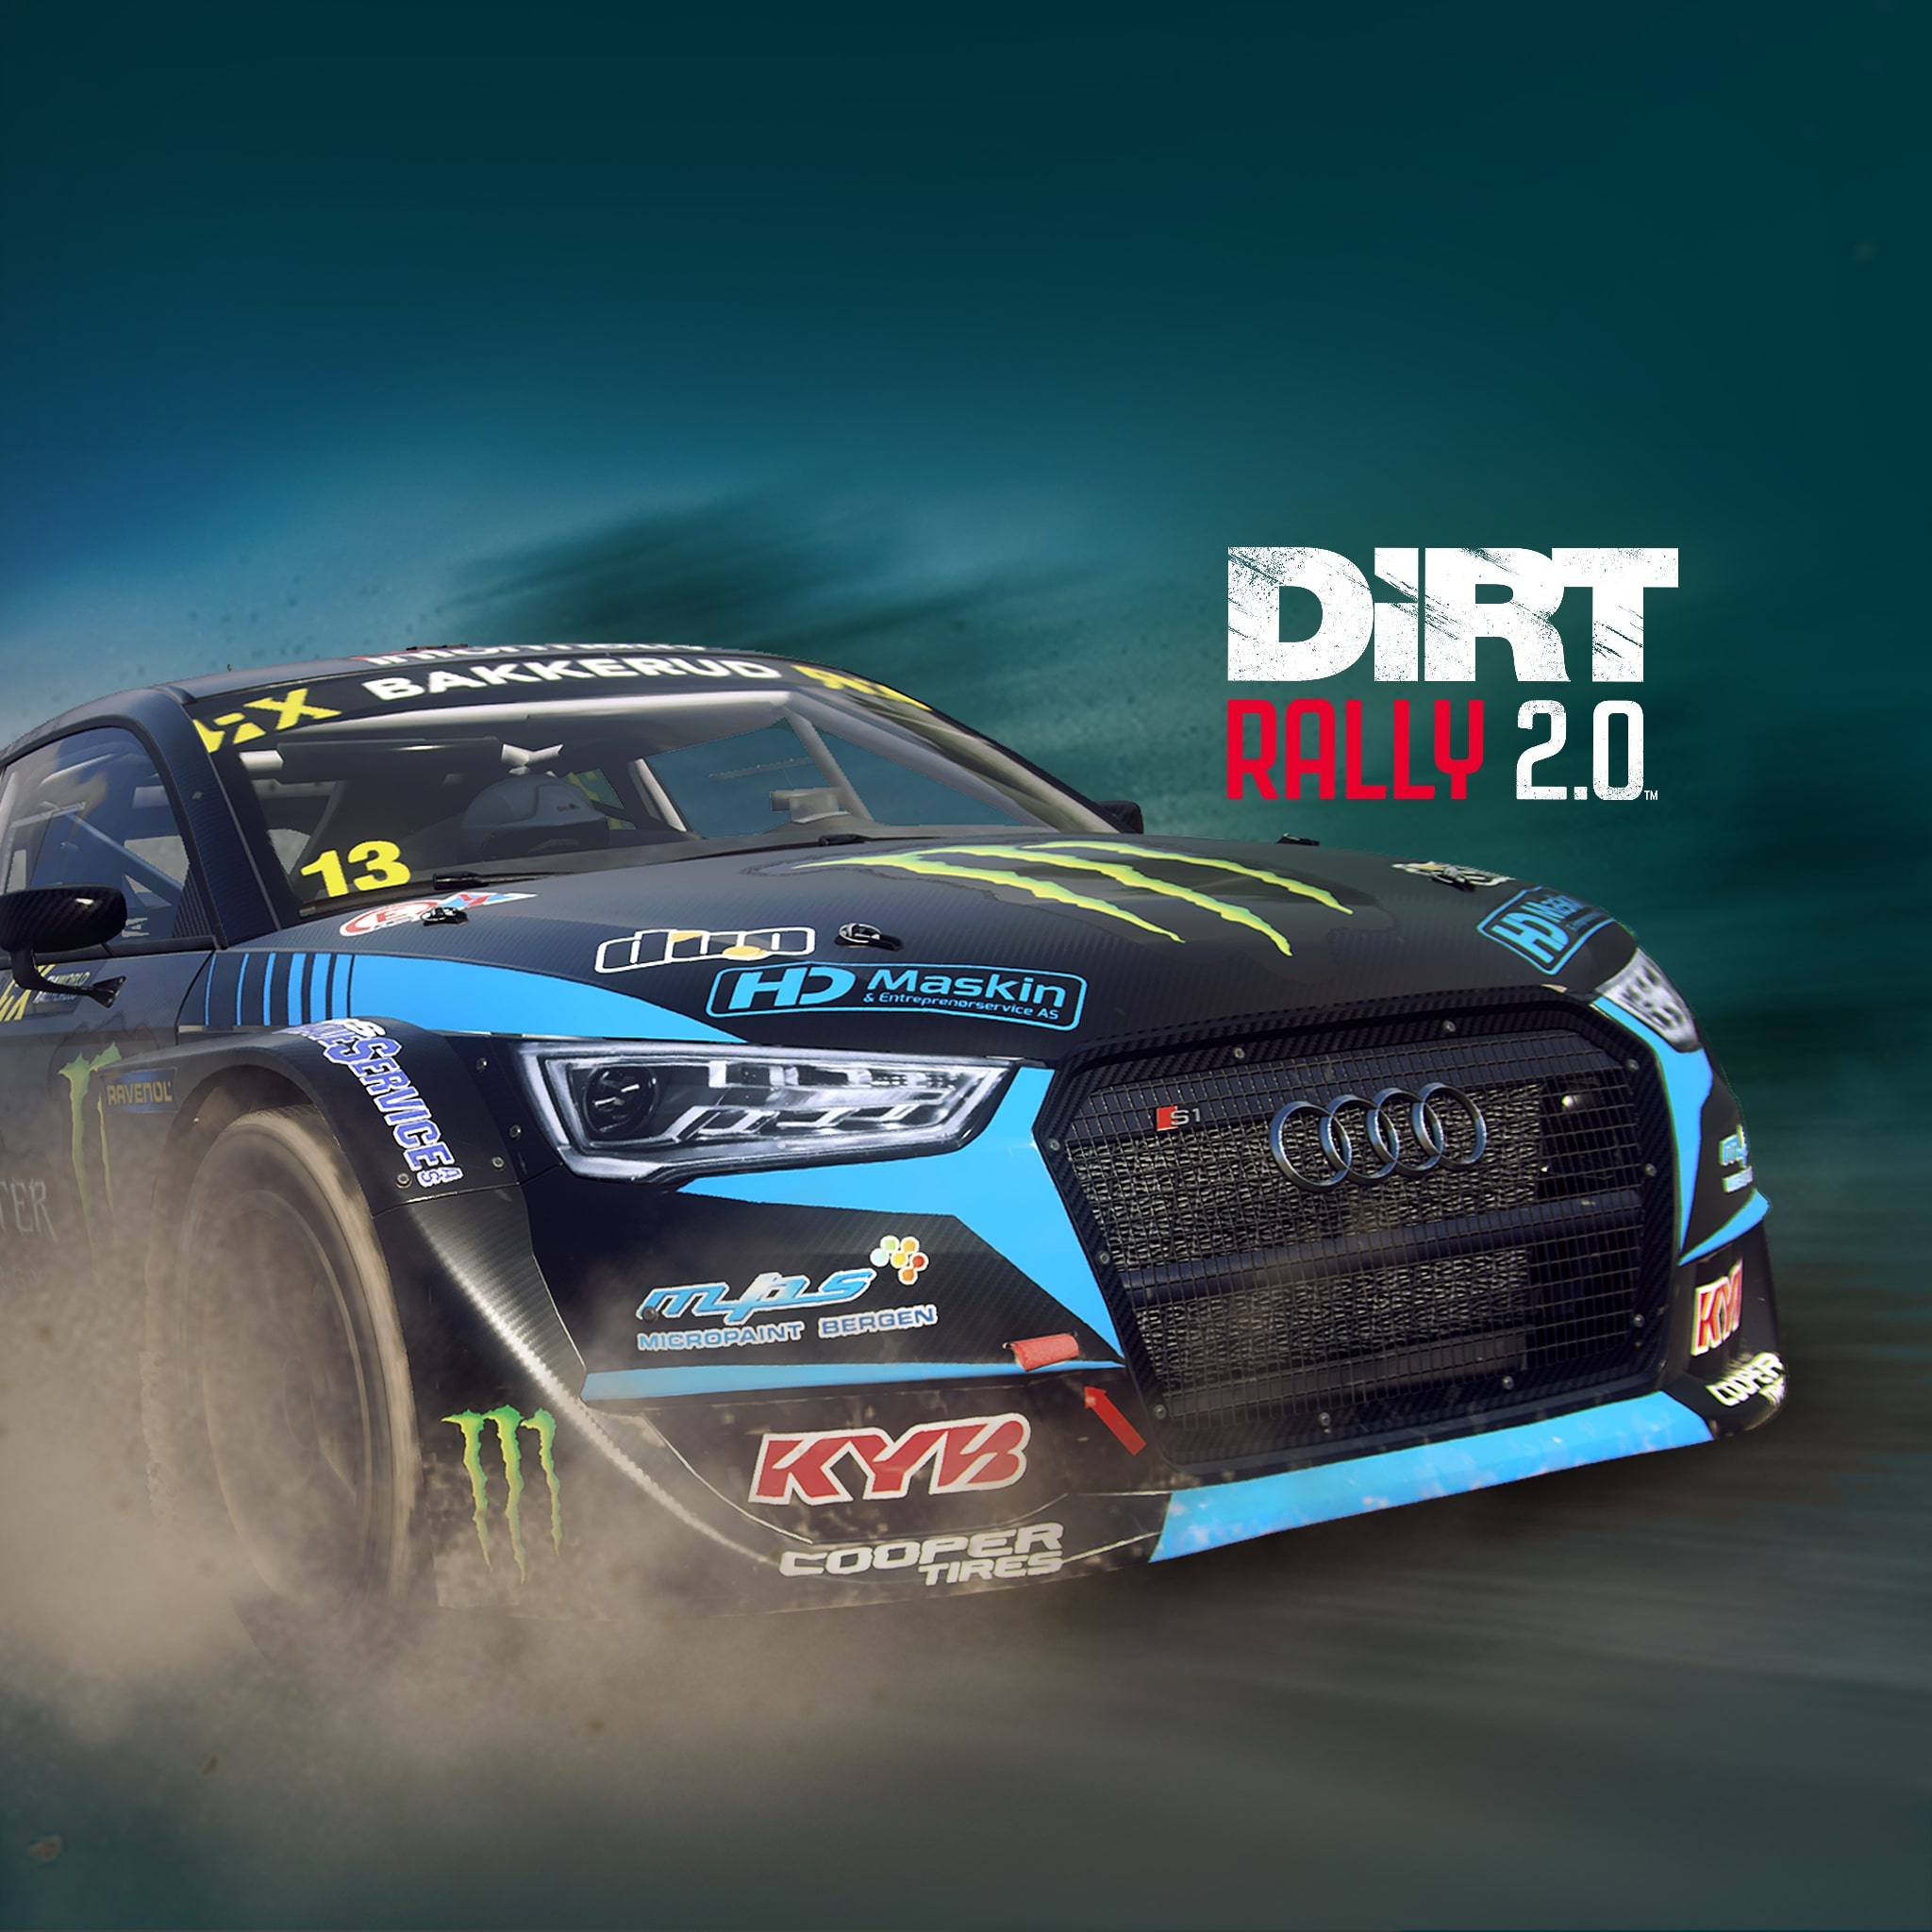 DLC für DiRT Rally 2.0 - Game of the Year Edition PS4 — online